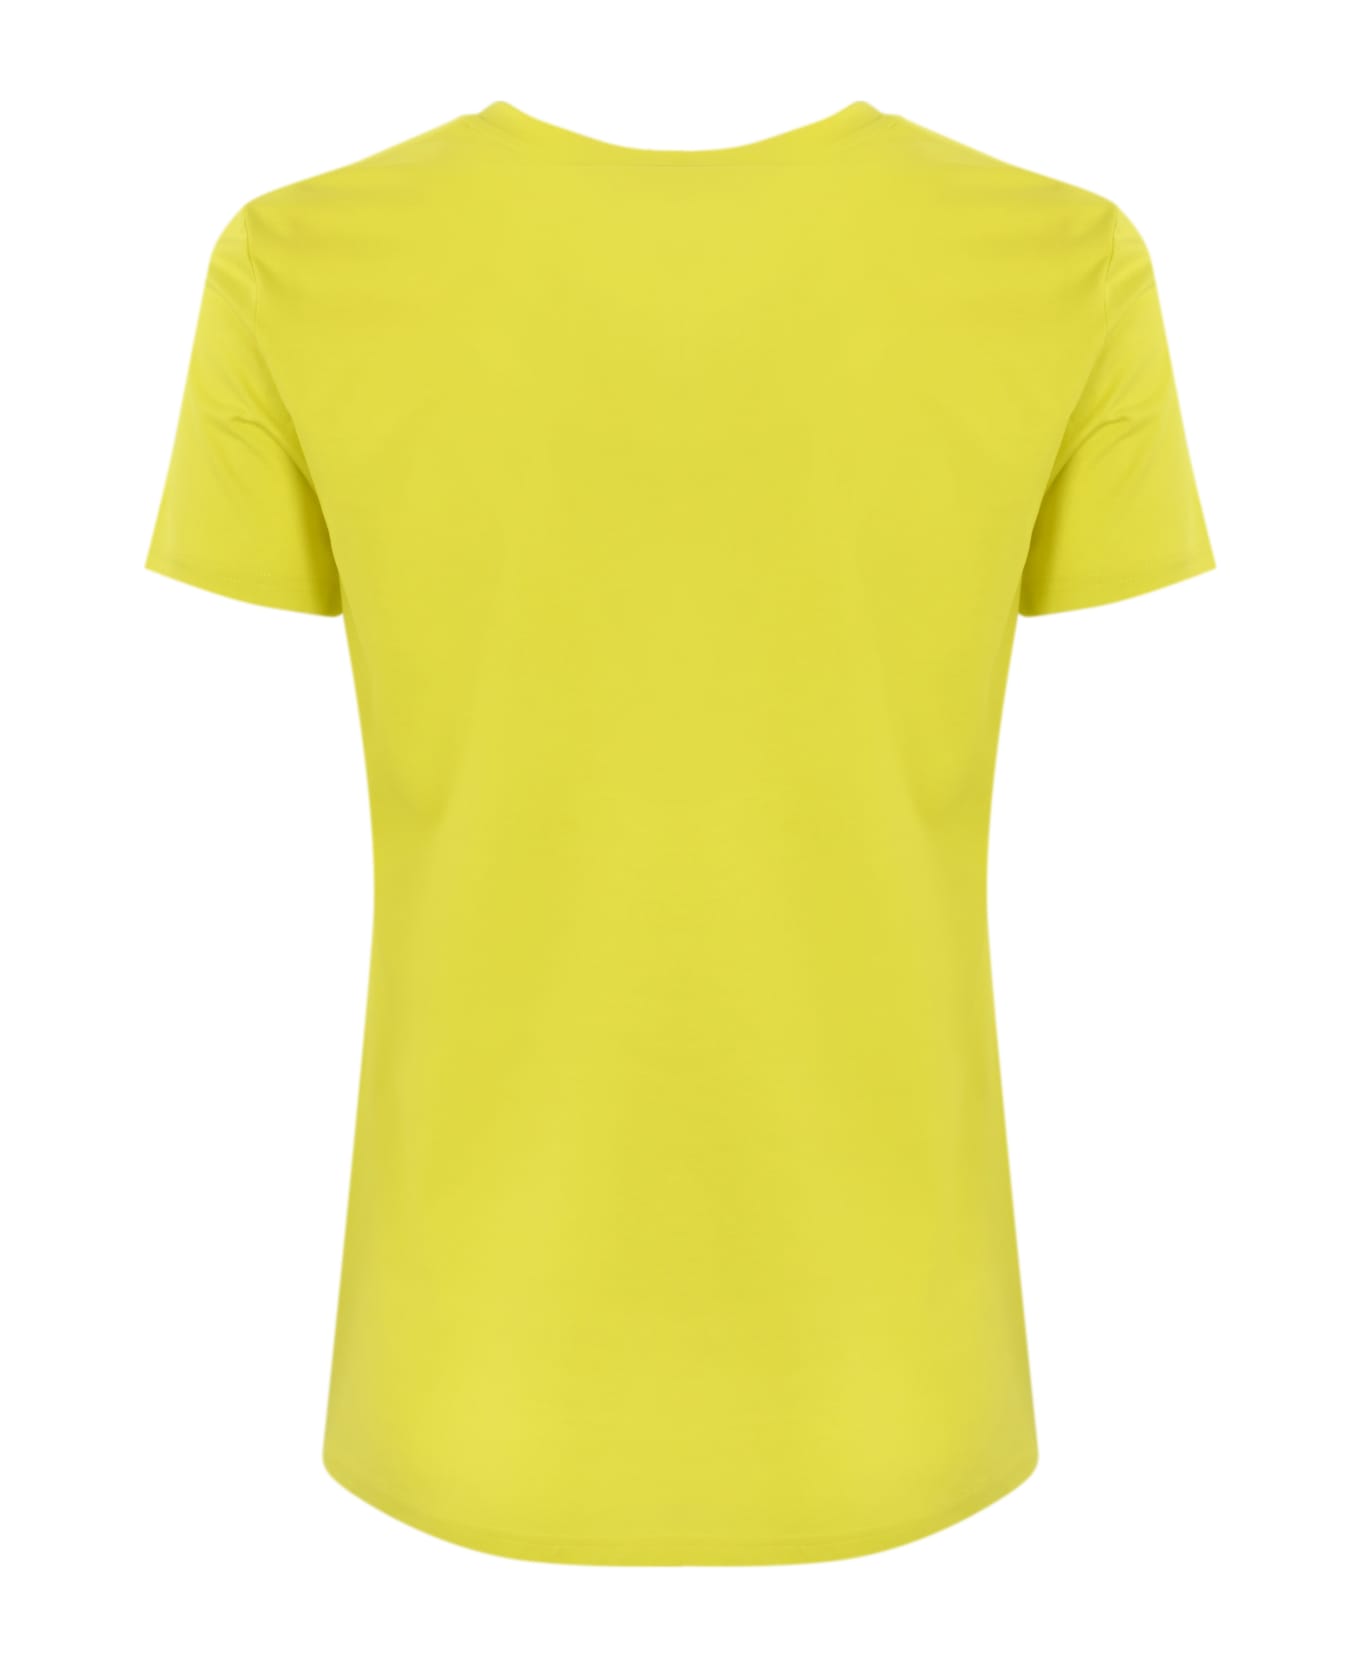 Max Mara Studio Cotton T-shirt With Feathers - Limone Tシャツ